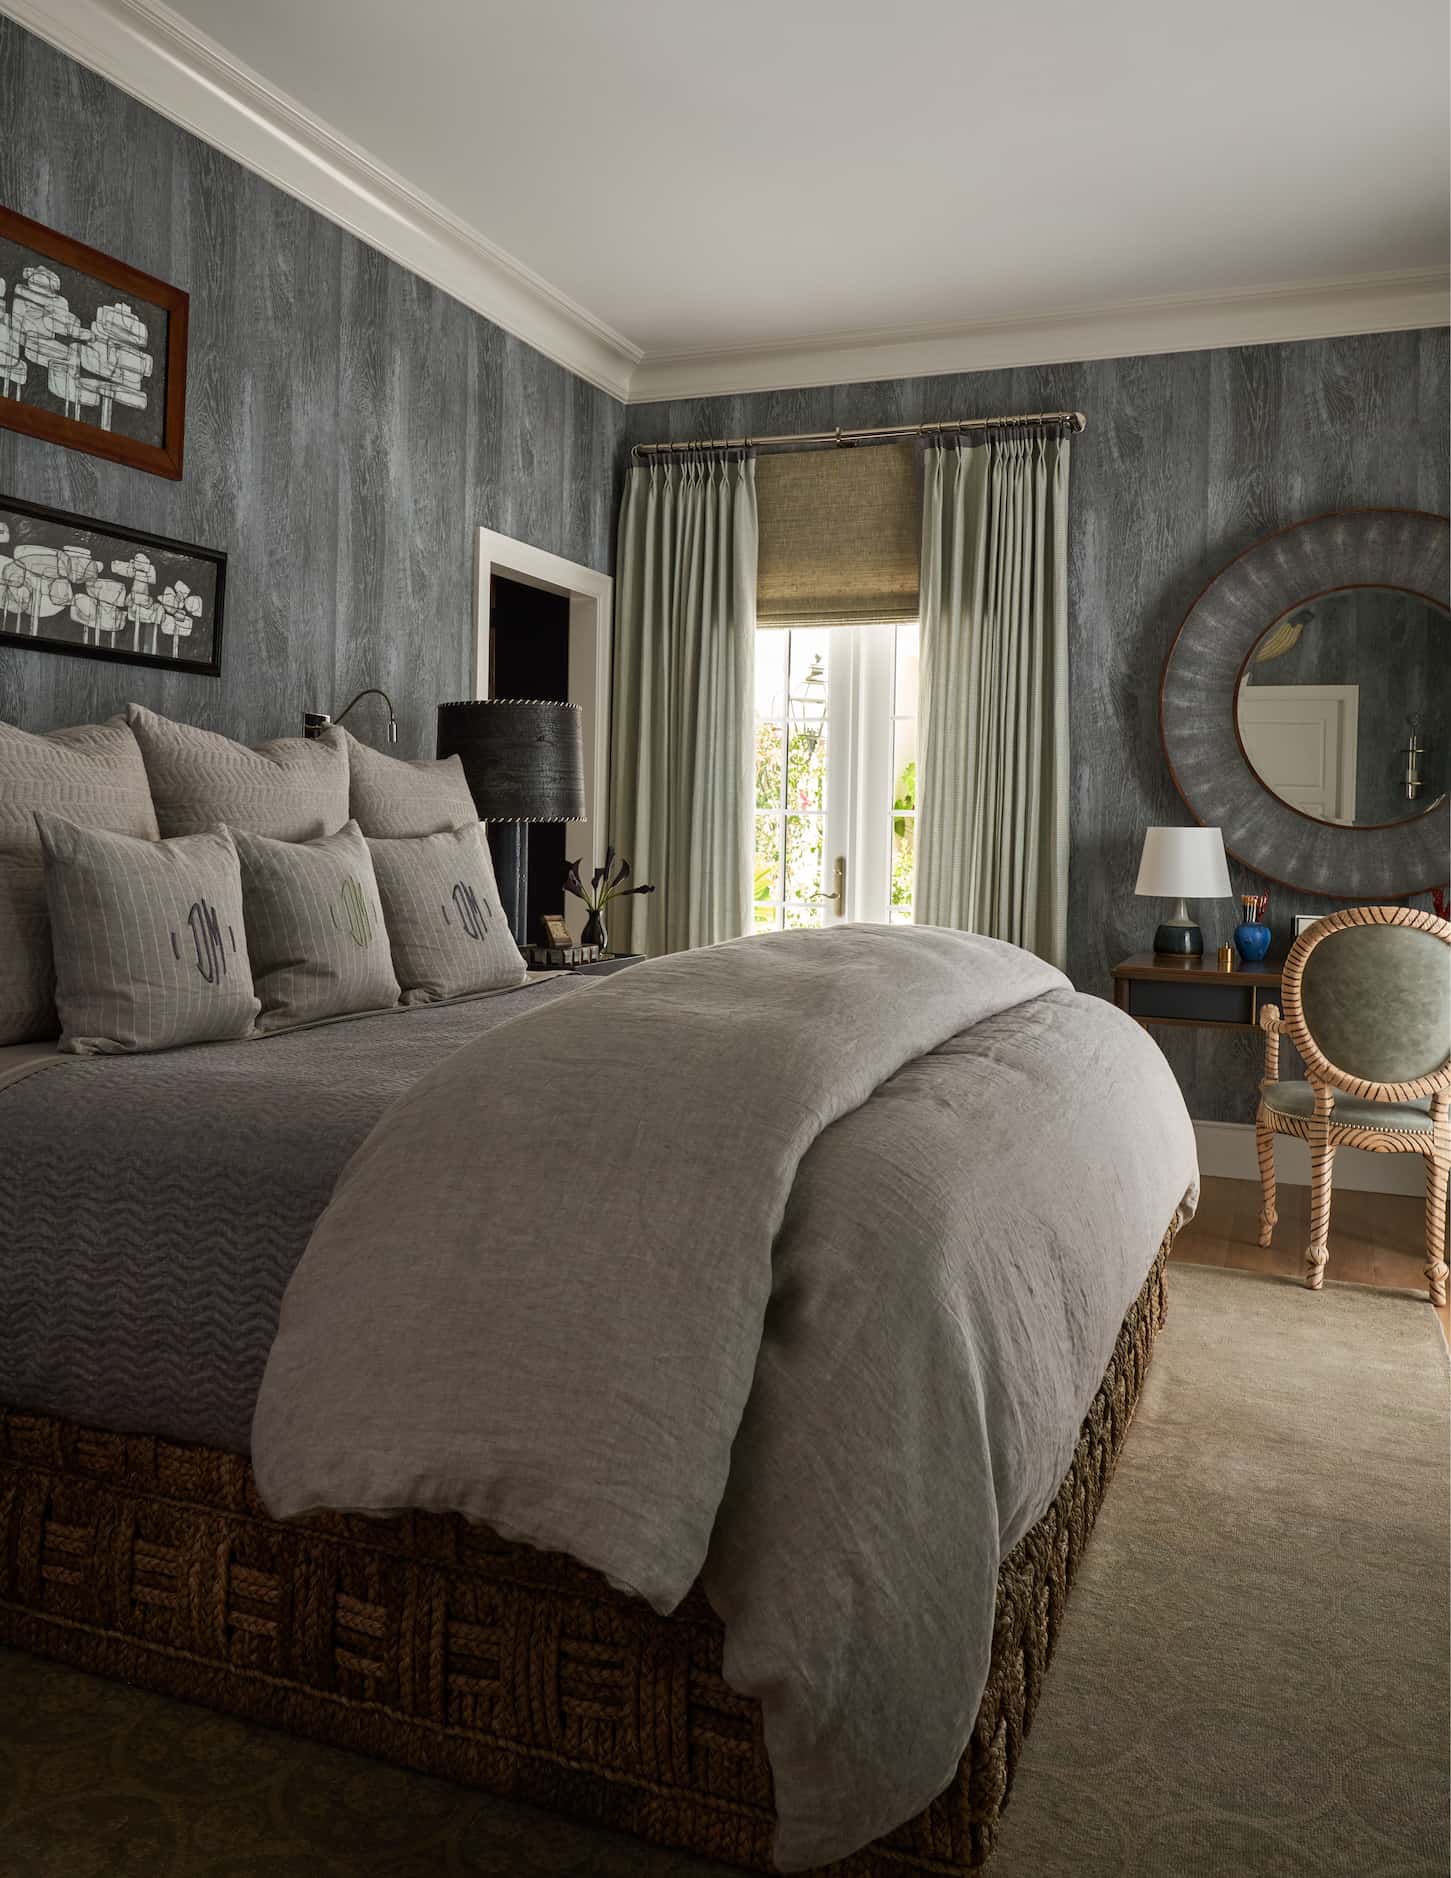 Bedroom with gray driftwood wallpaper, bed with neutral linens, desk and chair in background